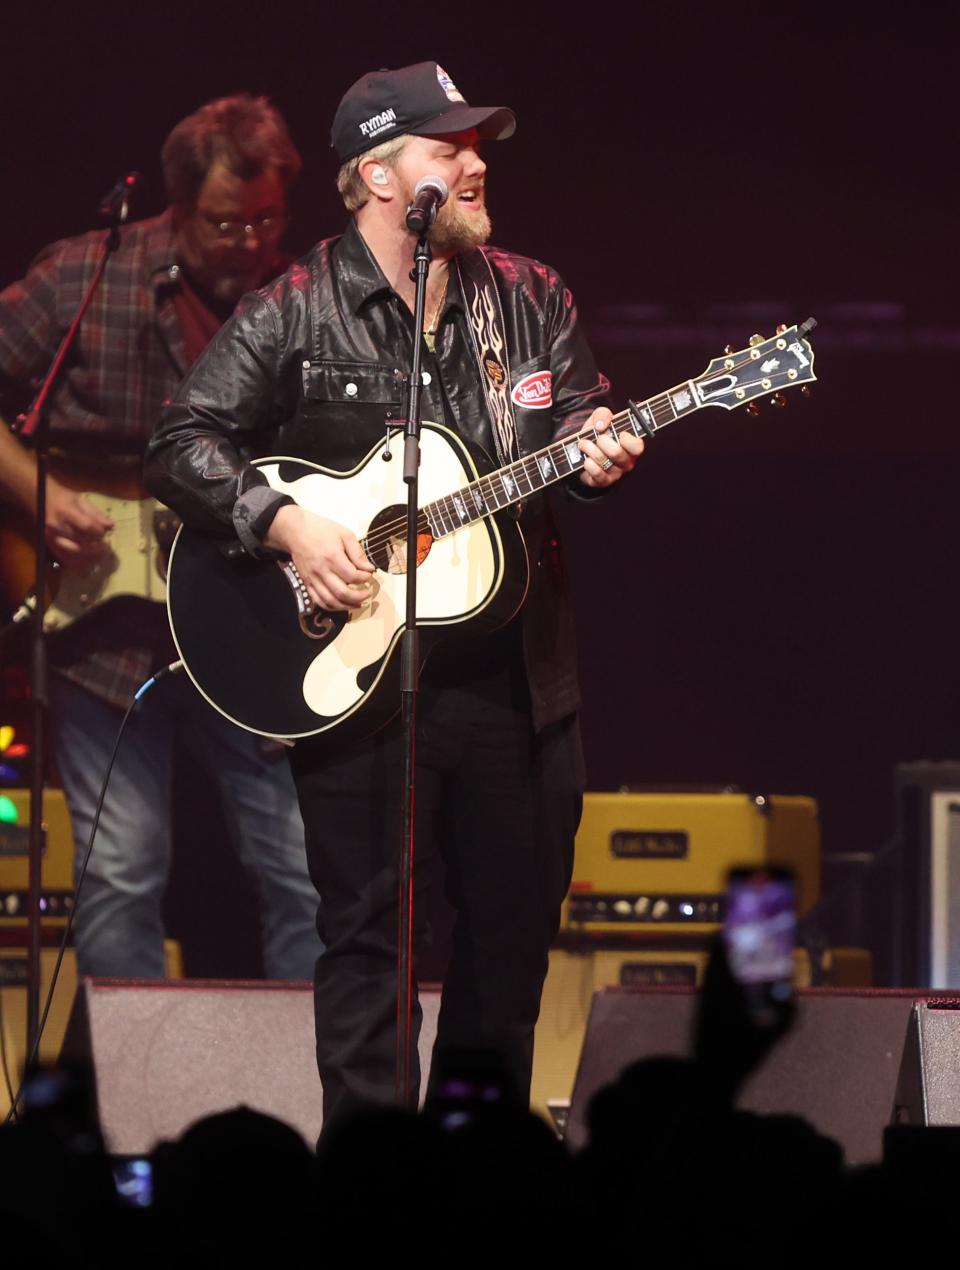 ERNEST performs during the All for the Hall concert benefitting the Country Music Hall of Fame and Museum, held at Bridgestone Arena in December.